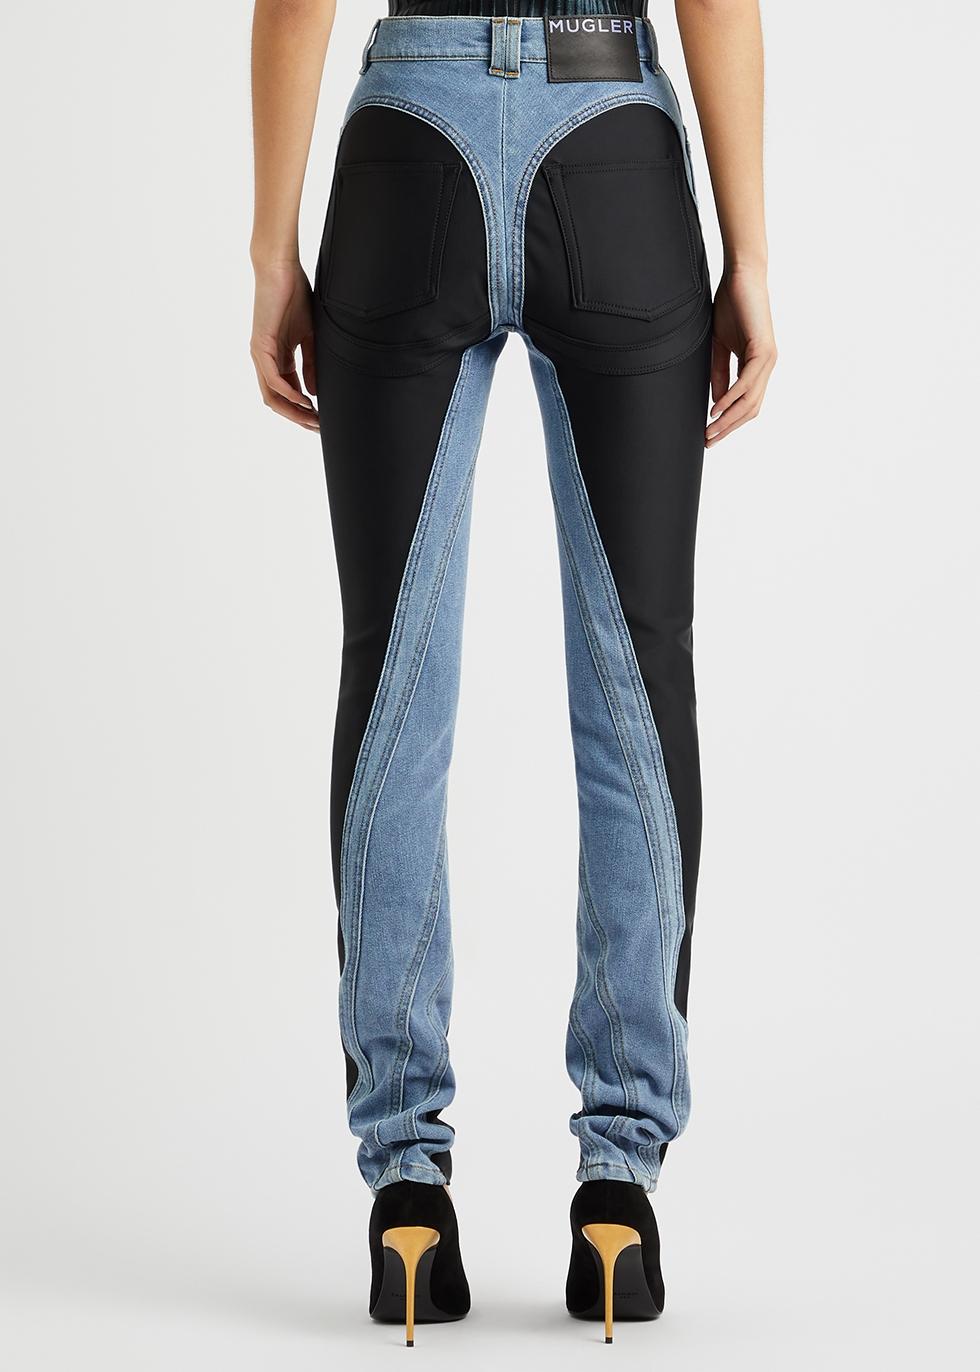 Mugler Spiral Two-tone Panelled Skinny Jeans in Blue | Lyst